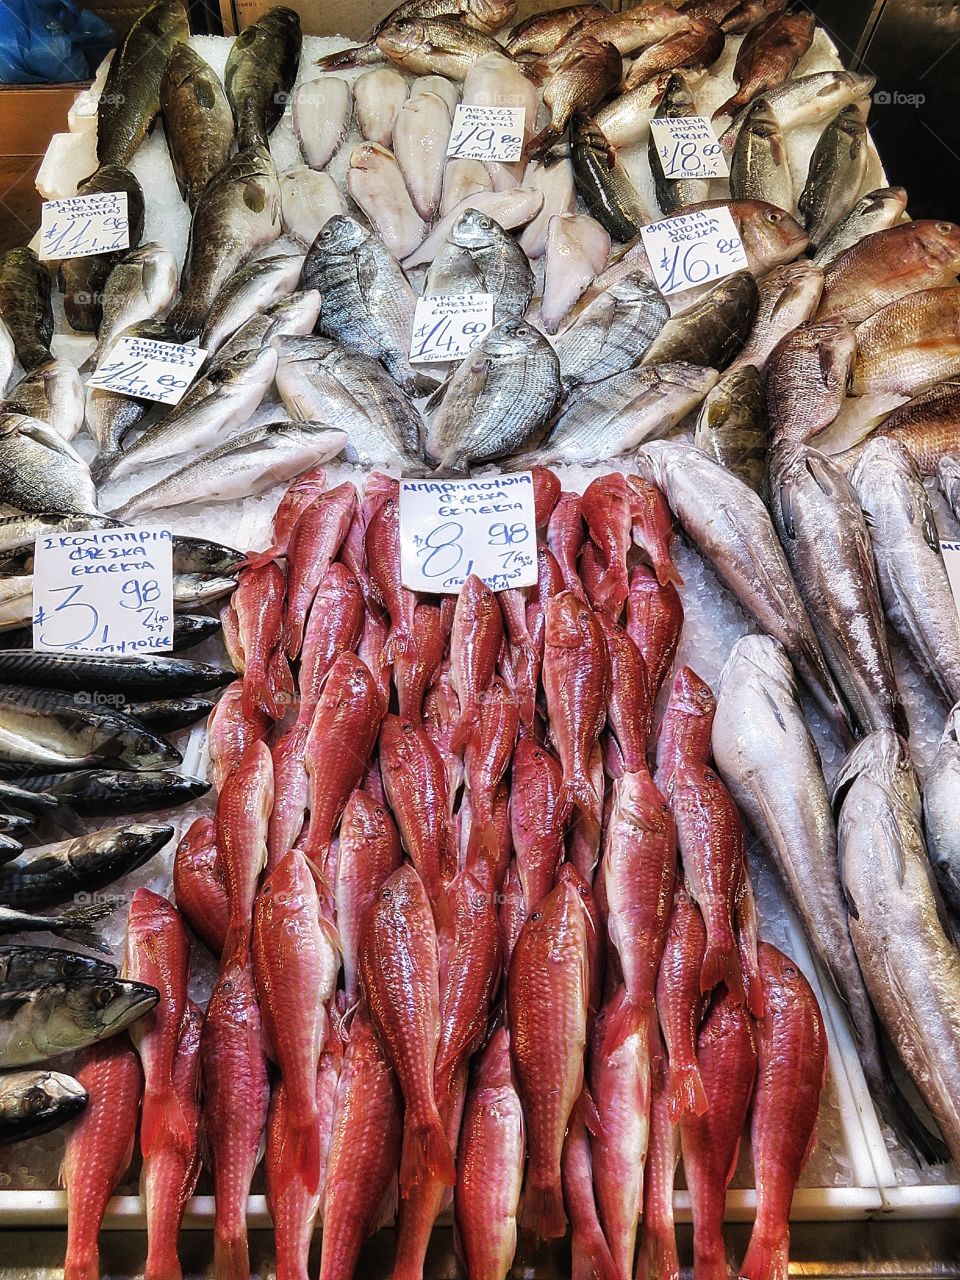 Athens central market - fish stall